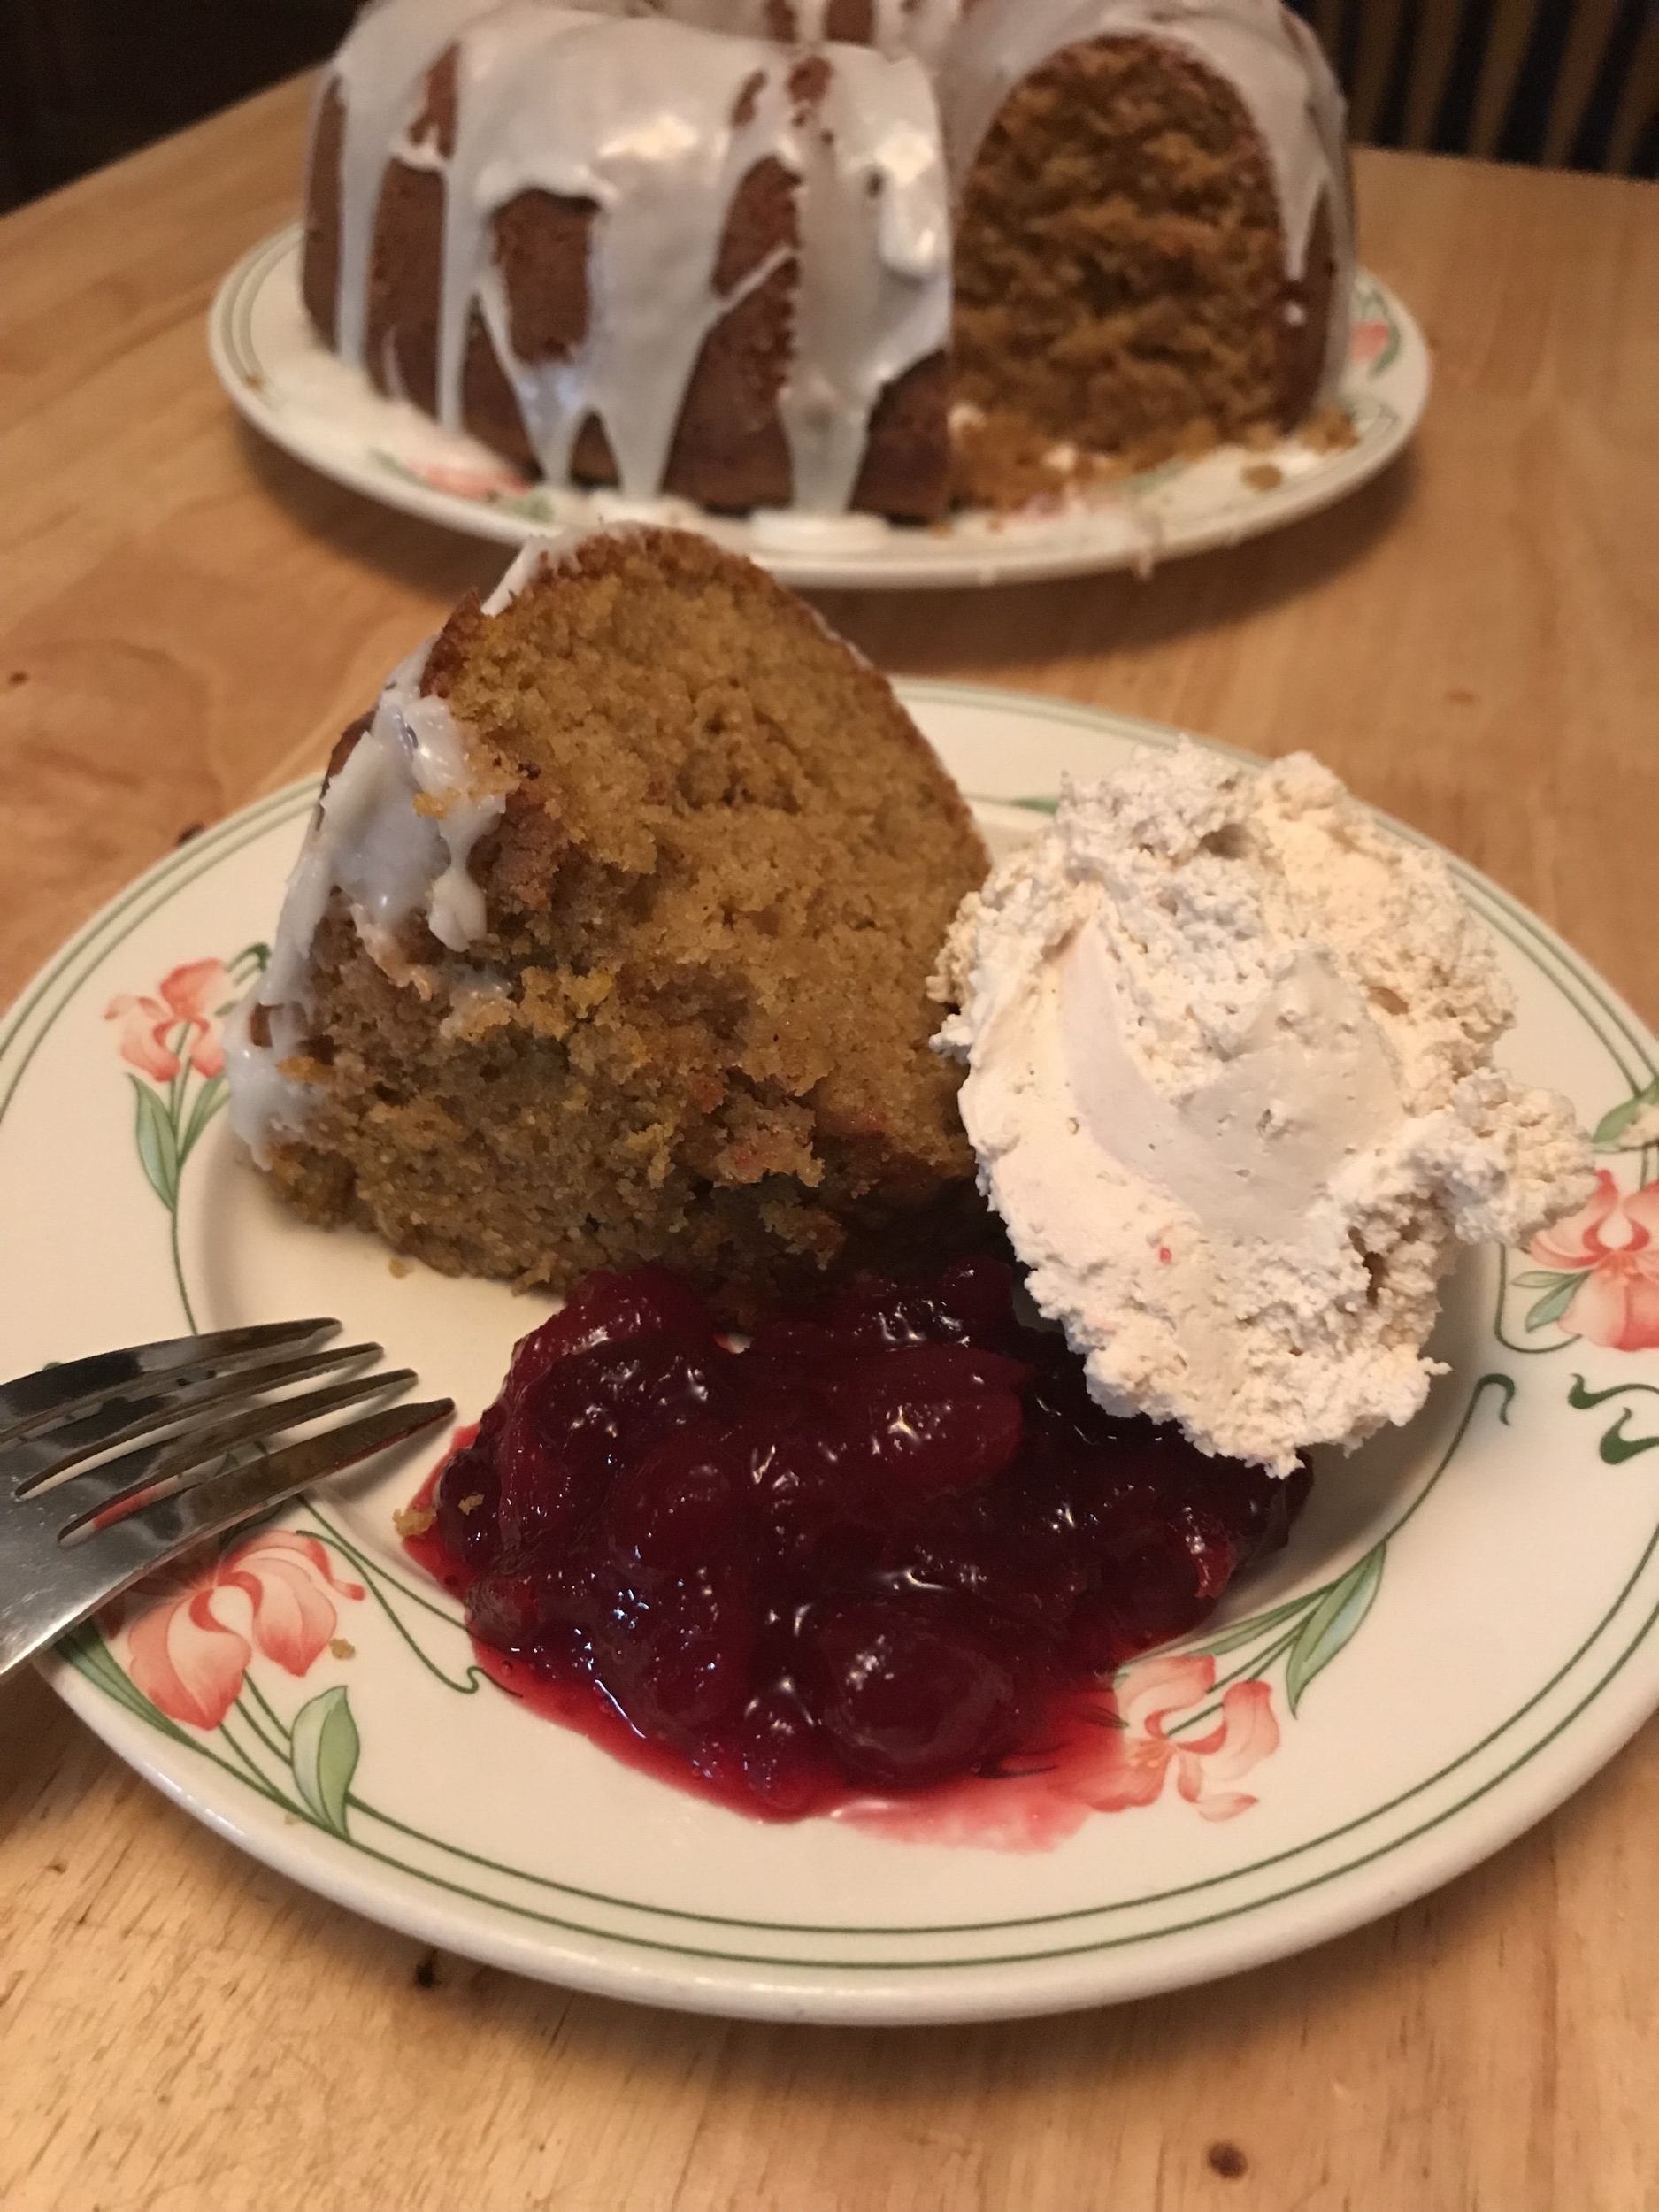 With cranberry sauce and apple whipped cream